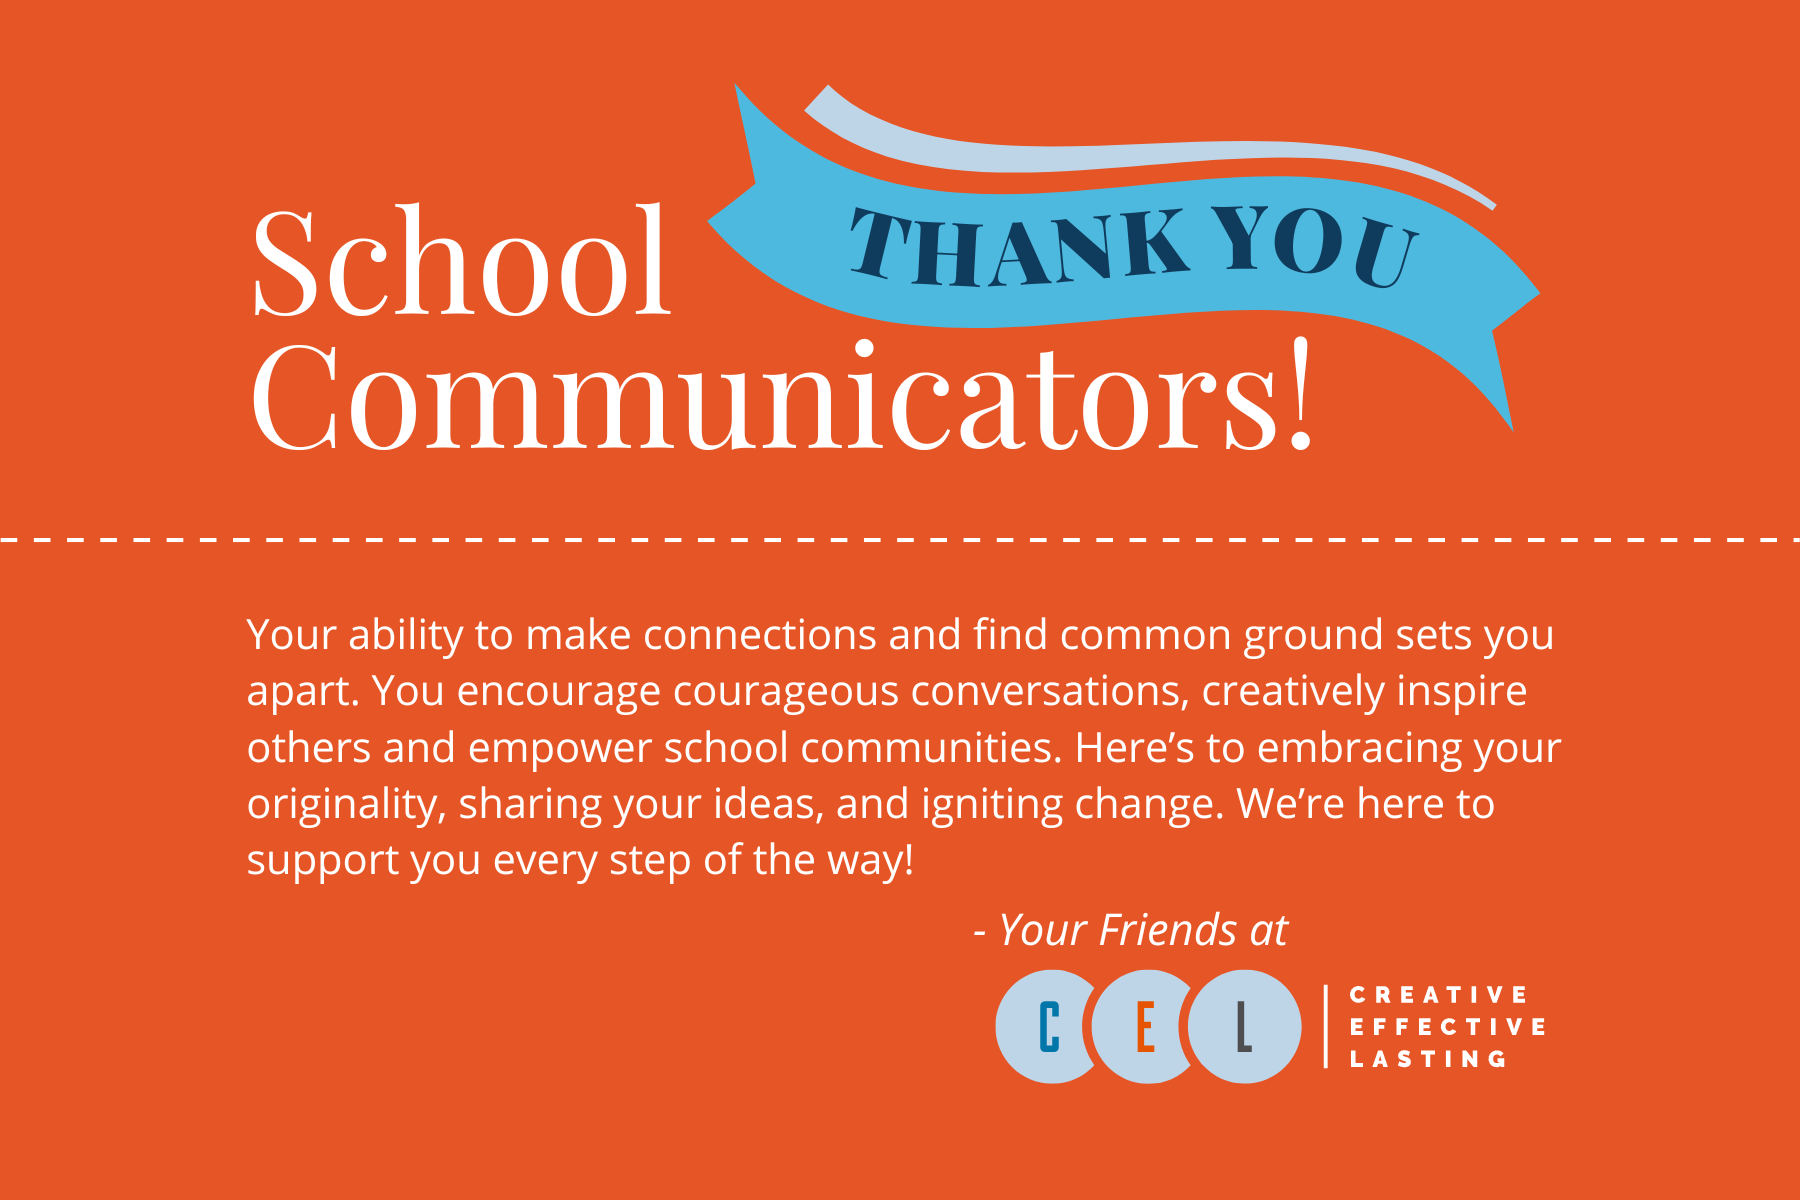 Thank you School Communicators! Your ability to make connections and find common ground sets you apart. You encourage courageous conversations, creatively inspire others and empower school communities. Here's to embracing your originality, sharing your ideas, and igniting change. We're here to support you every step of the way! Your friends at CEL